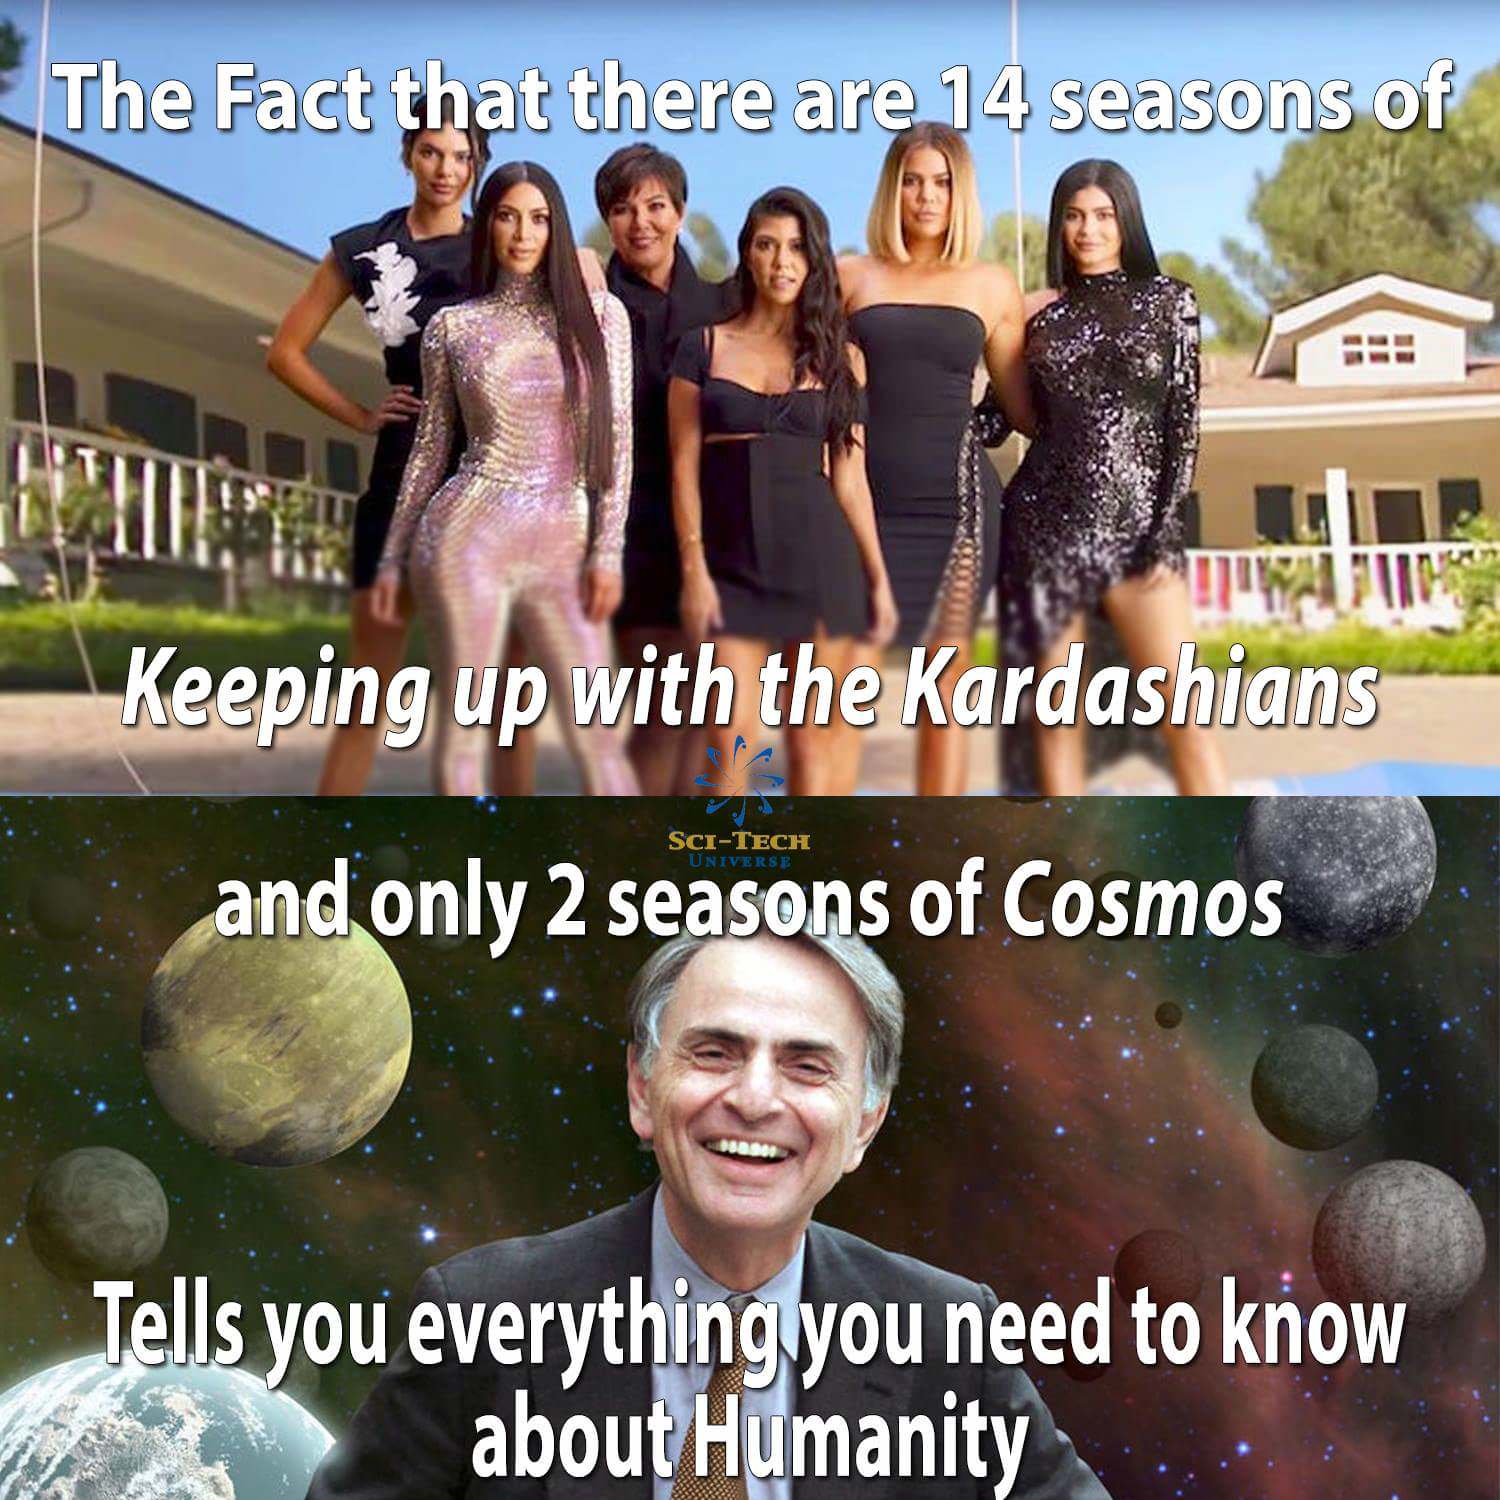 kardashians iconic - The Fact that there are 14 seasons of The Fact G Keeping up with the Kardashians and only 2 seasons of Cosmos SciTech Universe ses Tells you everything you need to know about Humanity